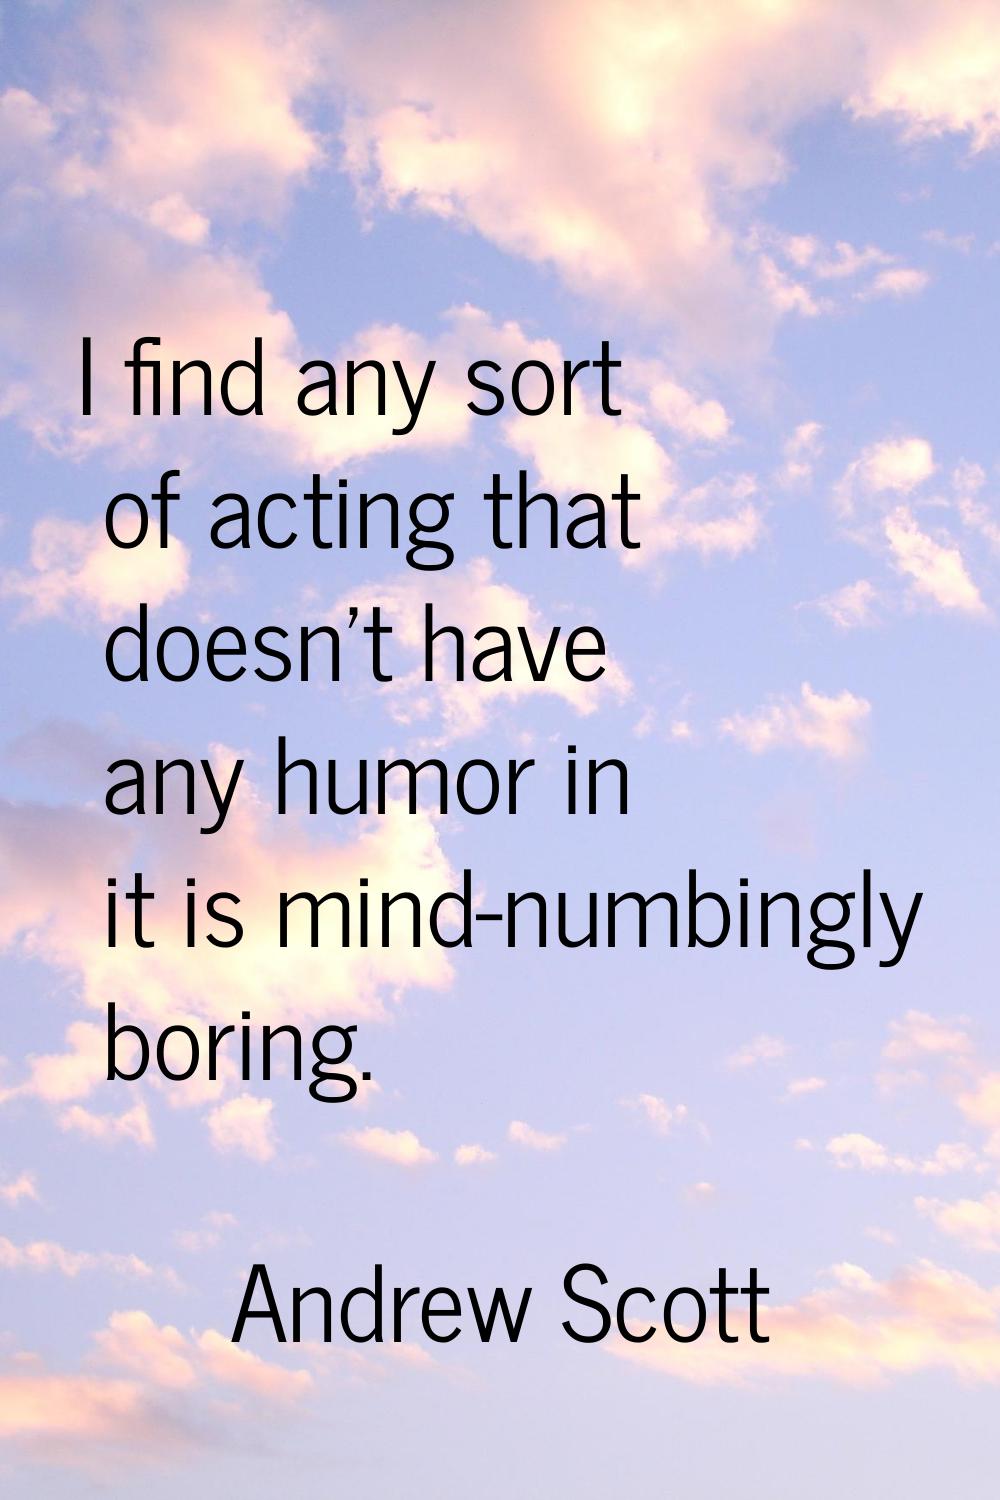 I find any sort of acting that doesn't have any humor in it is mind-numbingly boring.